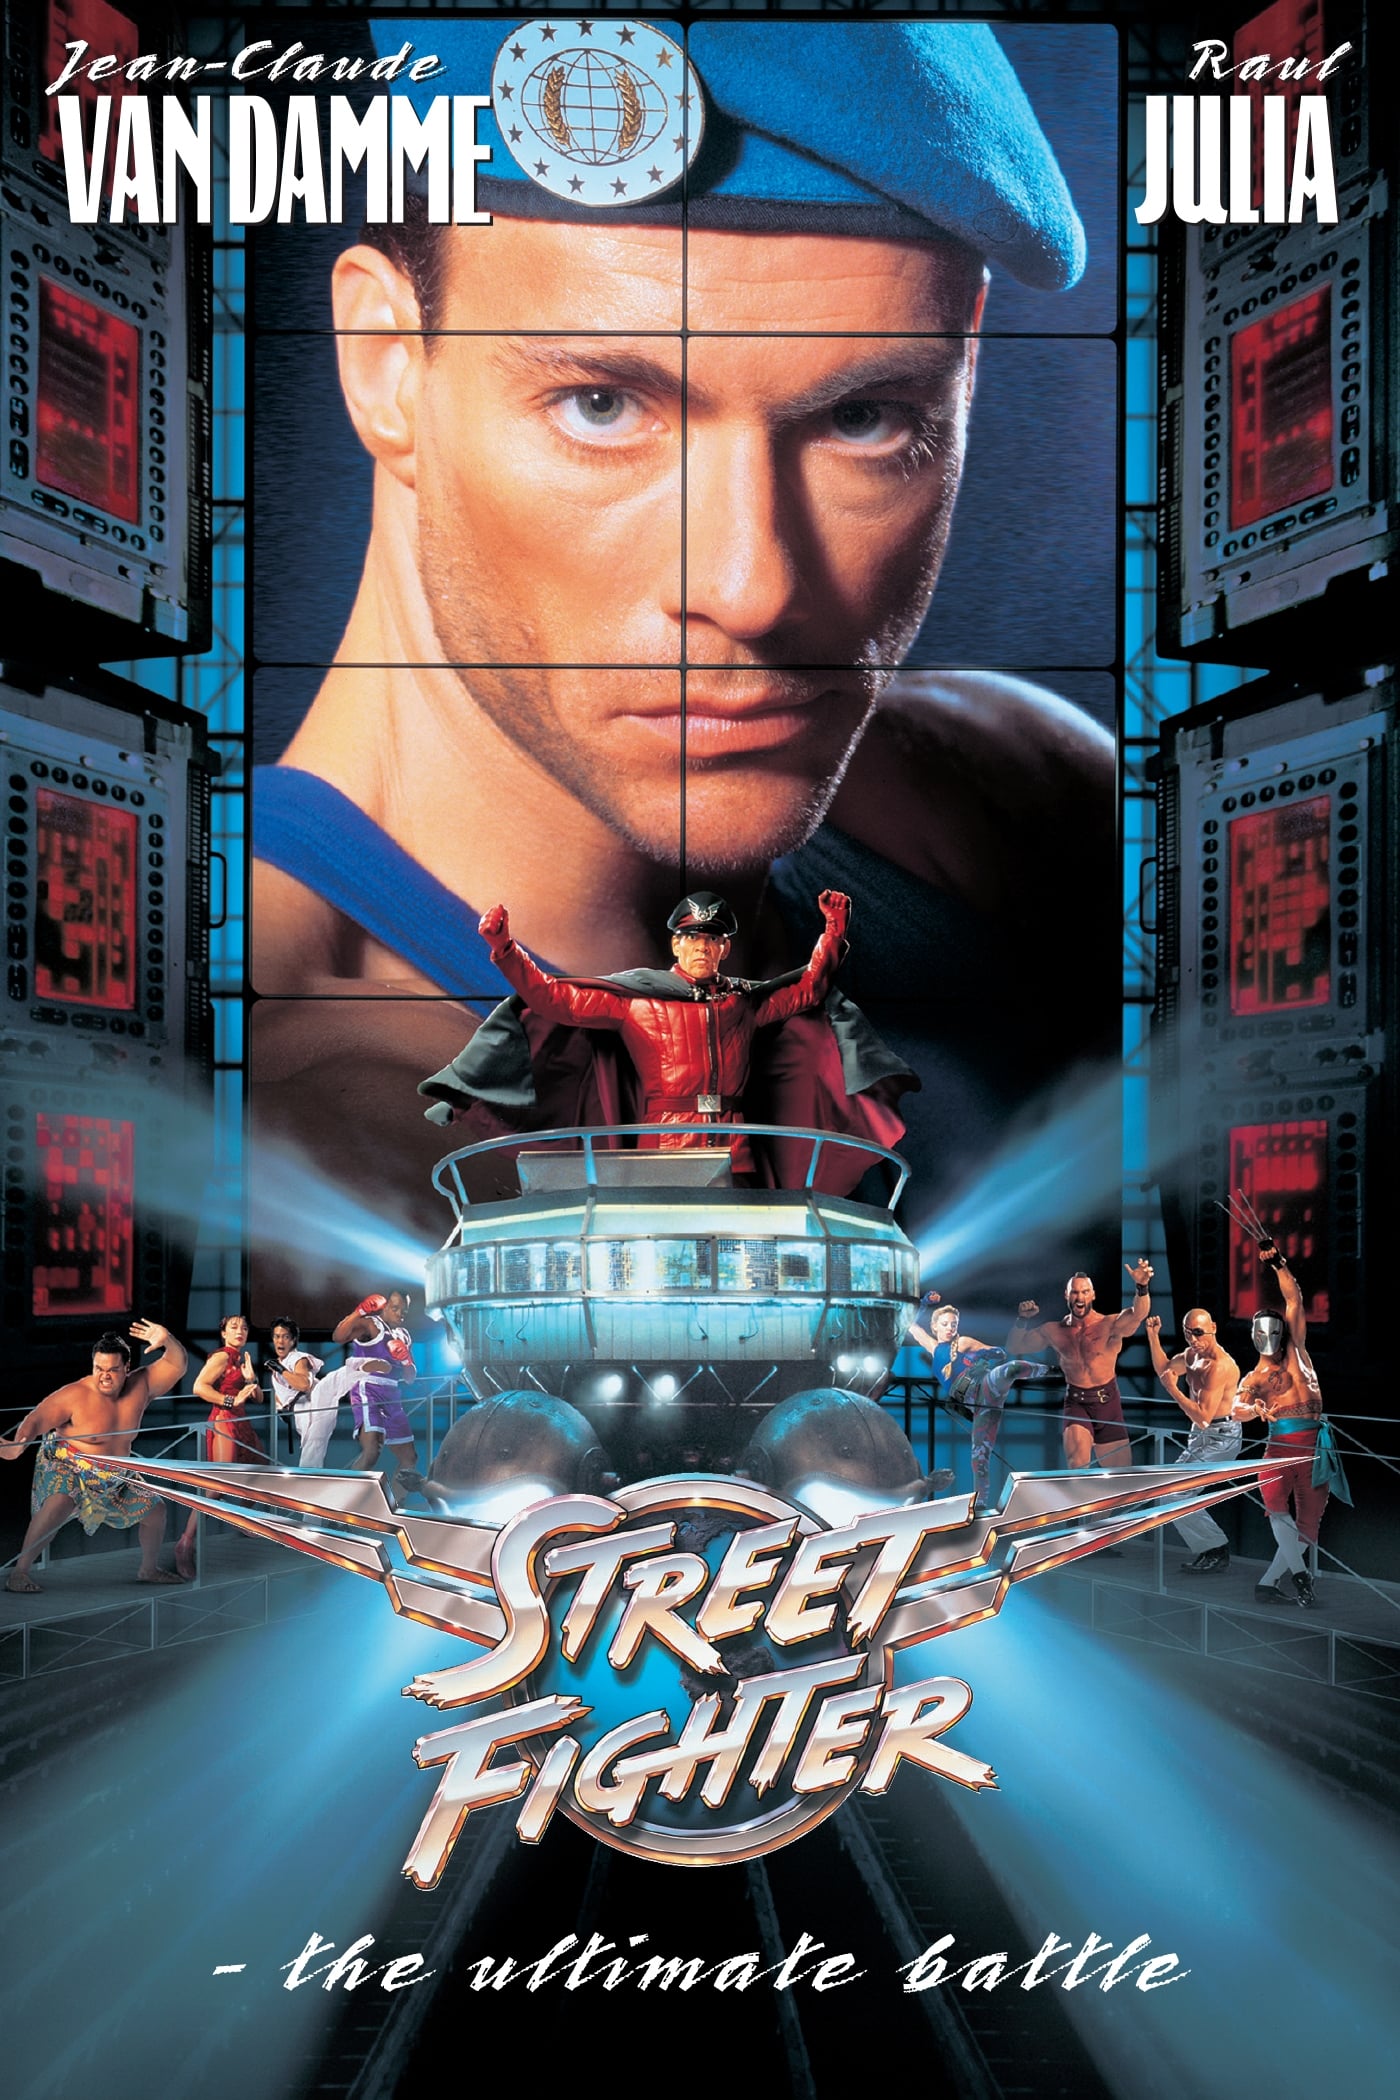 Jean-Claude Van Damme - Street Fighter: The Movie - SteelBook 📀 Blu-ray  edition from Mill Creek Entertainment pre-orders are live 🔛 .com   #JeanClaudeVanDamme #JCVD™️ # StreetFighter™️ #BluRay